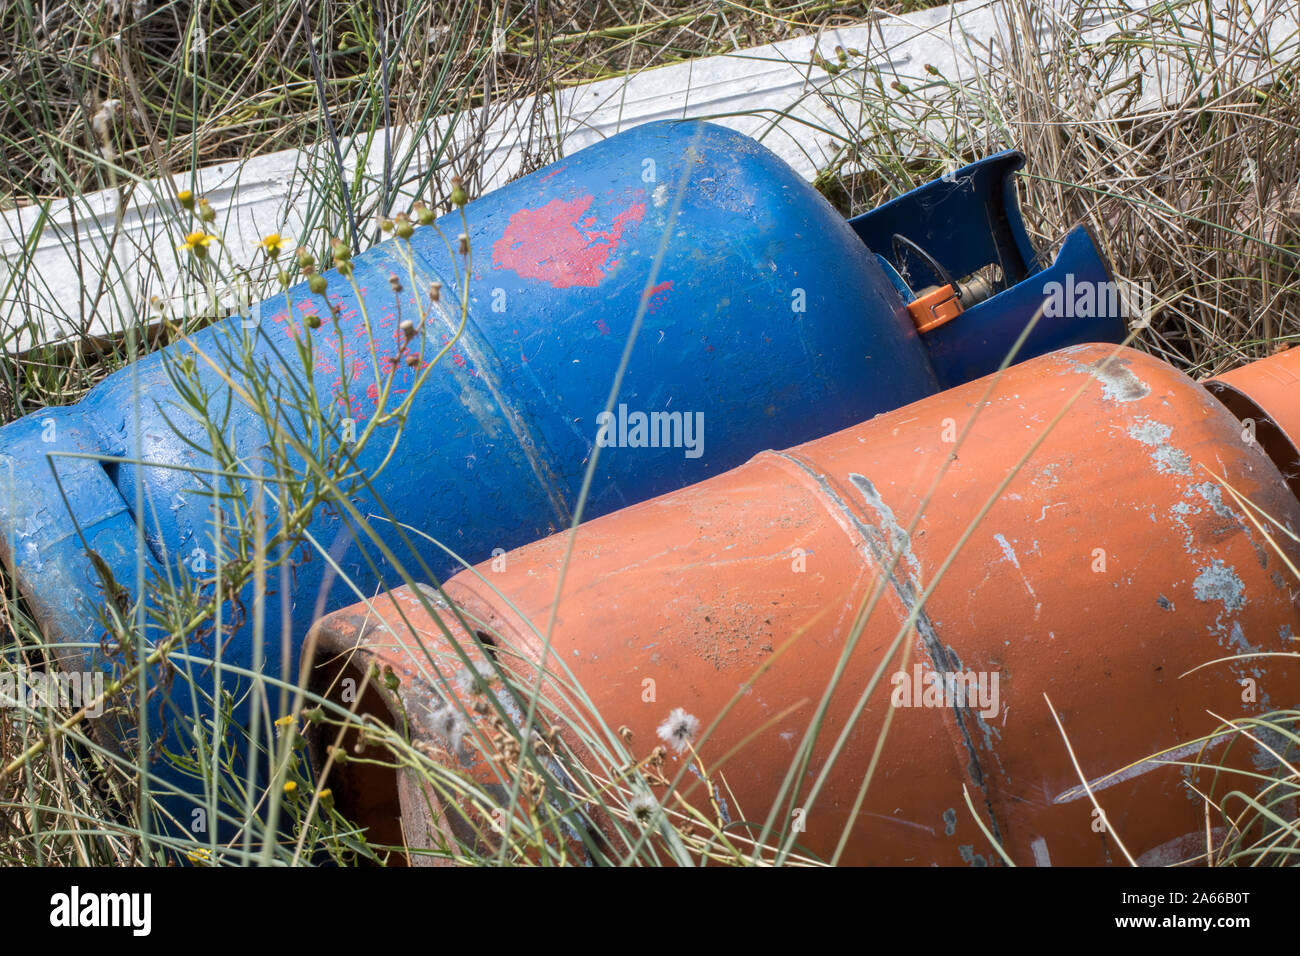 Fly-tip with gas canister bottles. Toxic hazardous waste fly tipping. Irresponsible environmental damage and danger caused by illegal rubbish dumping. Stock Photo